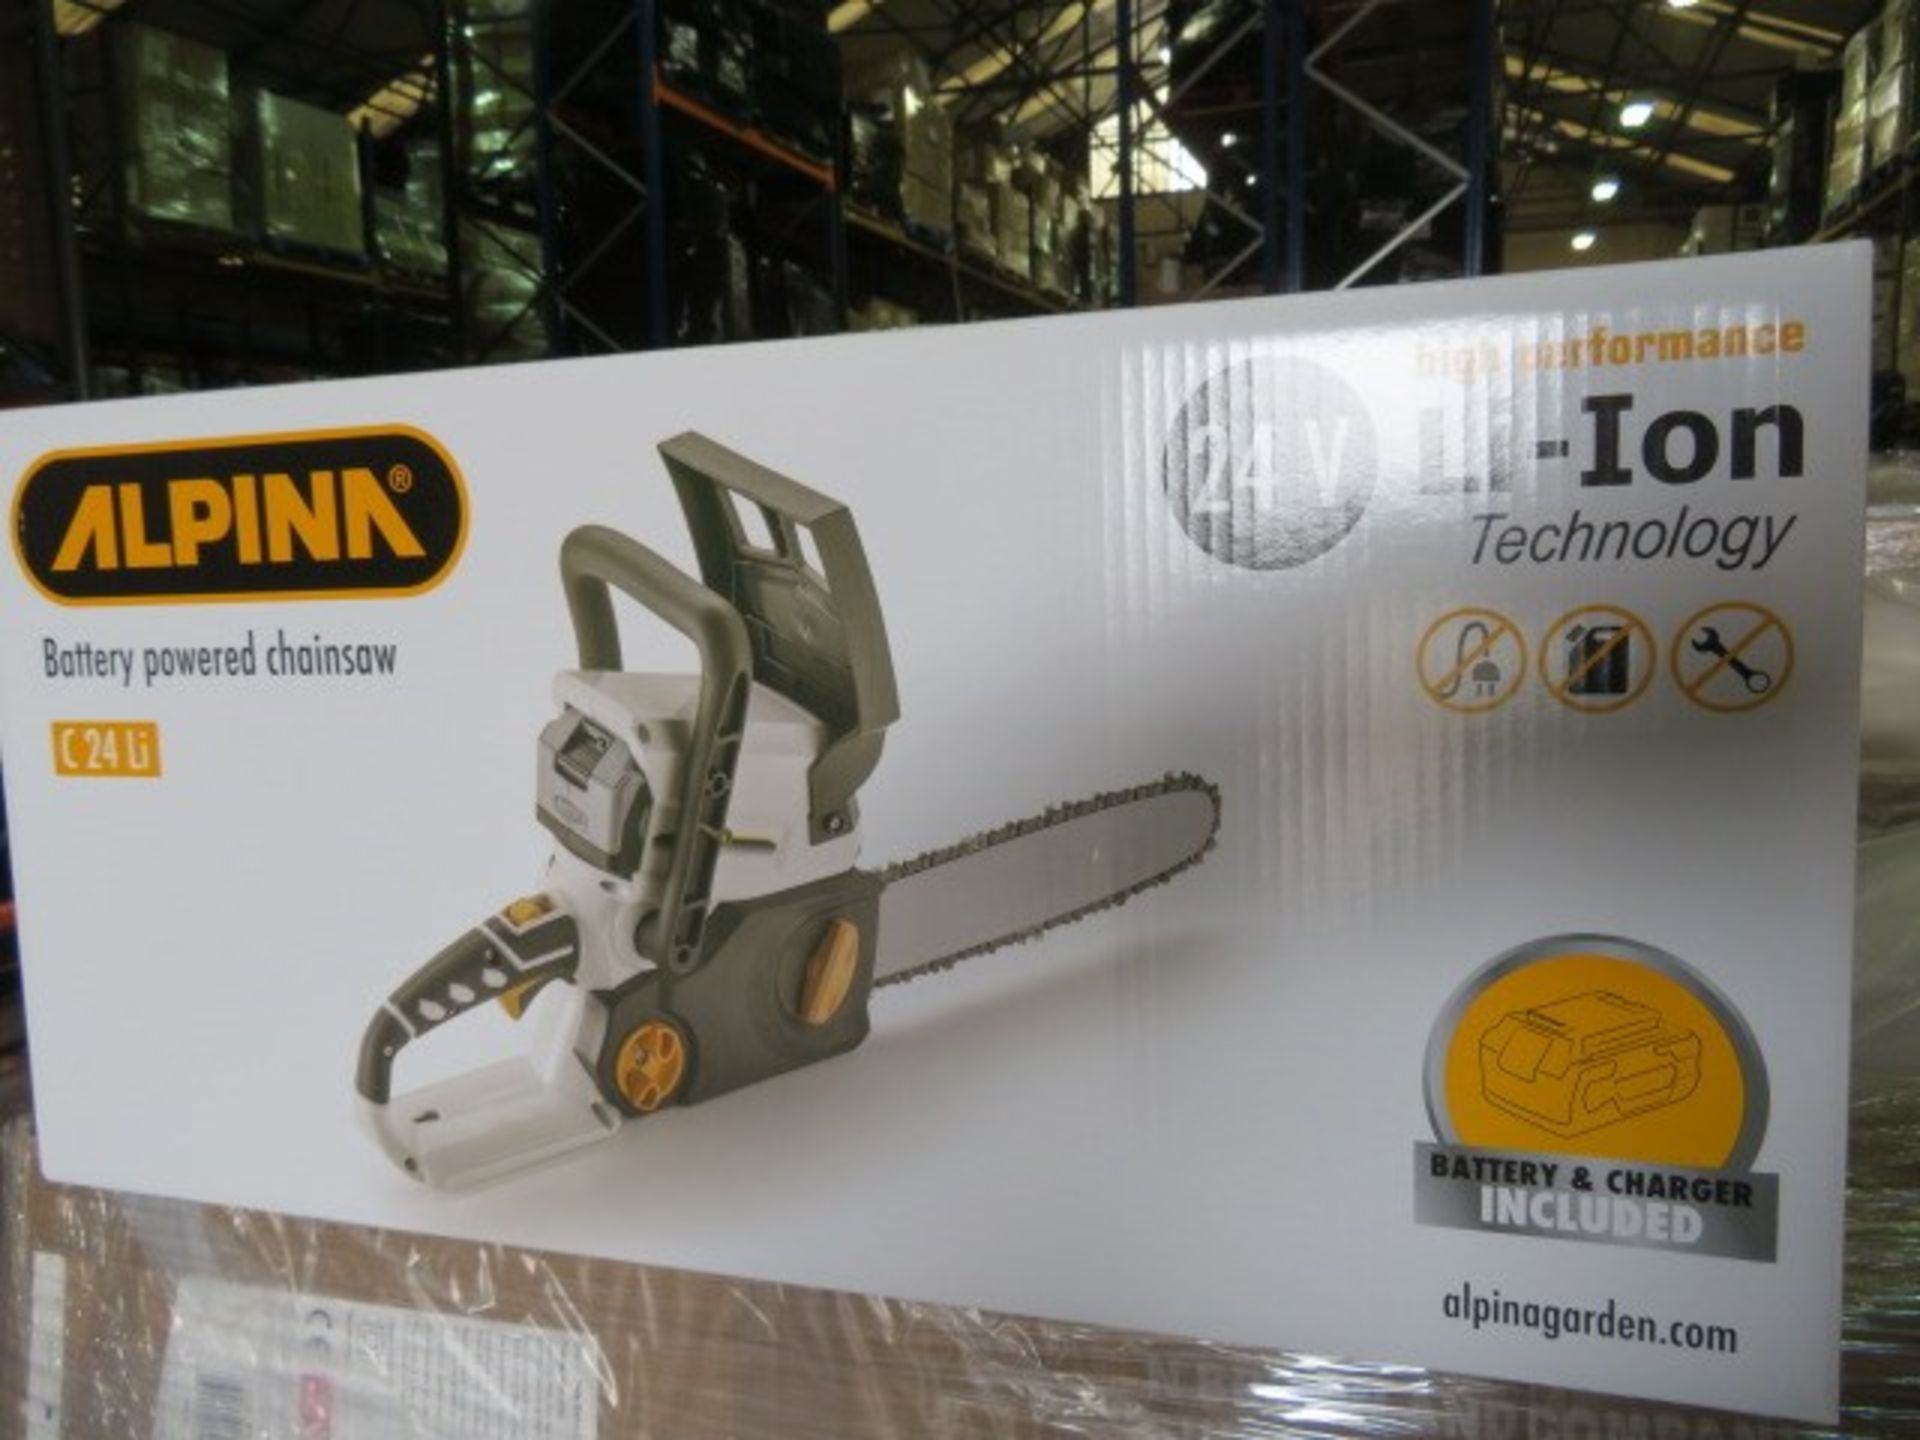 1 x Brand New Boxed Alpina C24LI 24V Li-ion Battery Powered Chainsaw With 4Ah Battery.RRP £199.00.